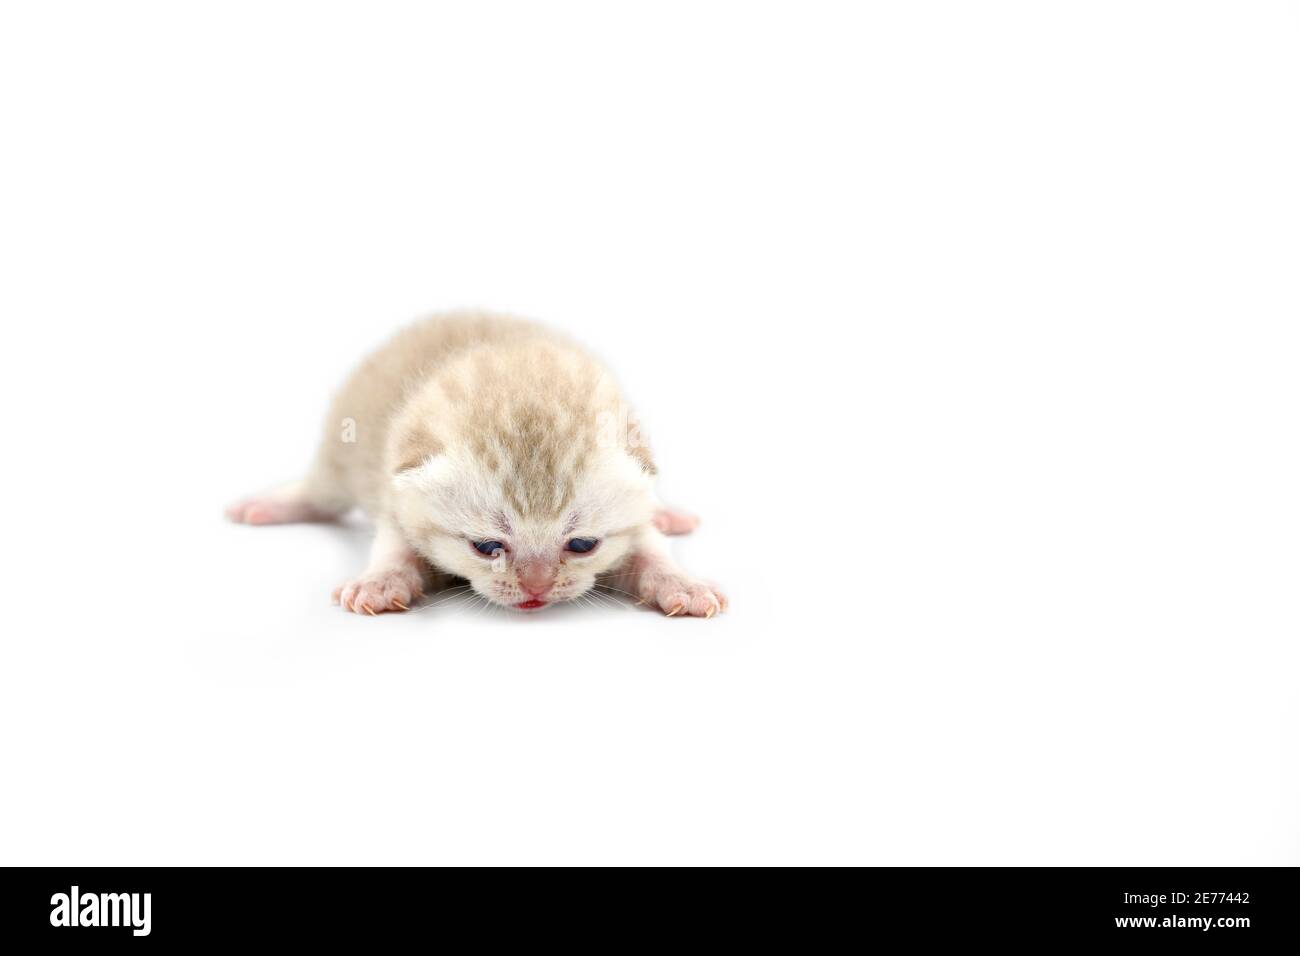 British shorthair kitten silver chocolate color, Newborn cat on a white background. Stock Photo